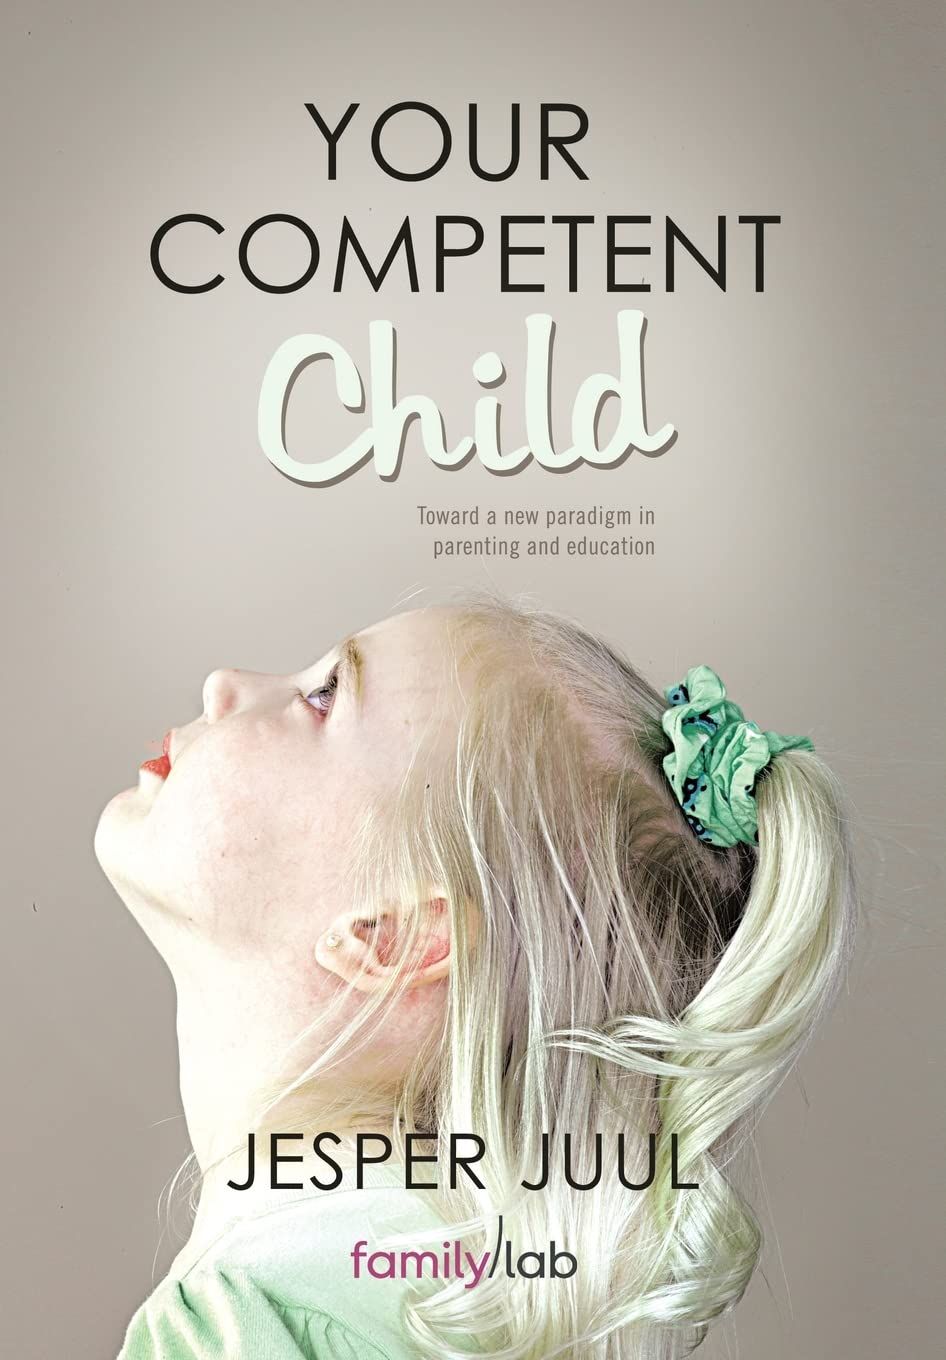 Your Competent Child: Toward a New Paradigm in Parenting and Education by Jesper Juul